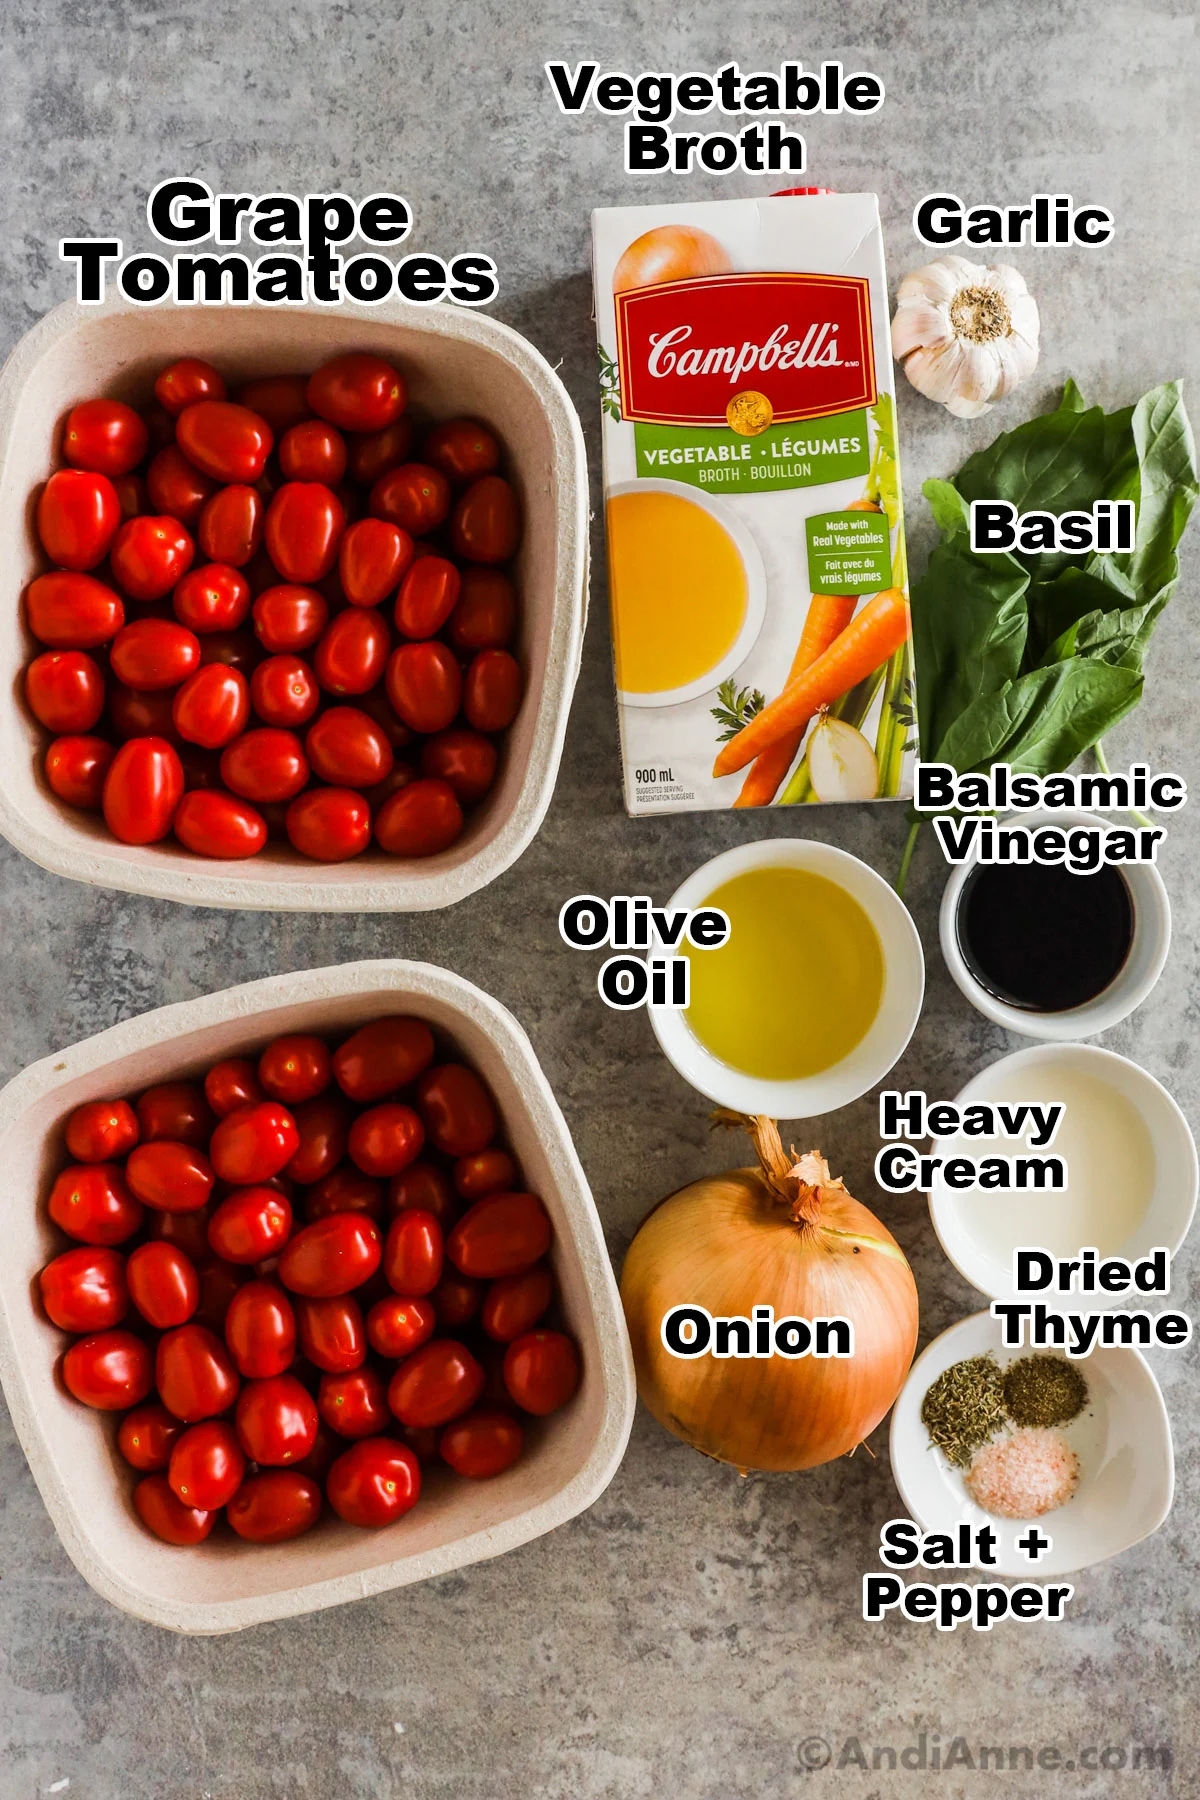 Recipe ingredients including bowls of grape tomatoes, carton of broth, fresh basil, yellow onion, bowls of olive oil, balsamic, cream and spices.